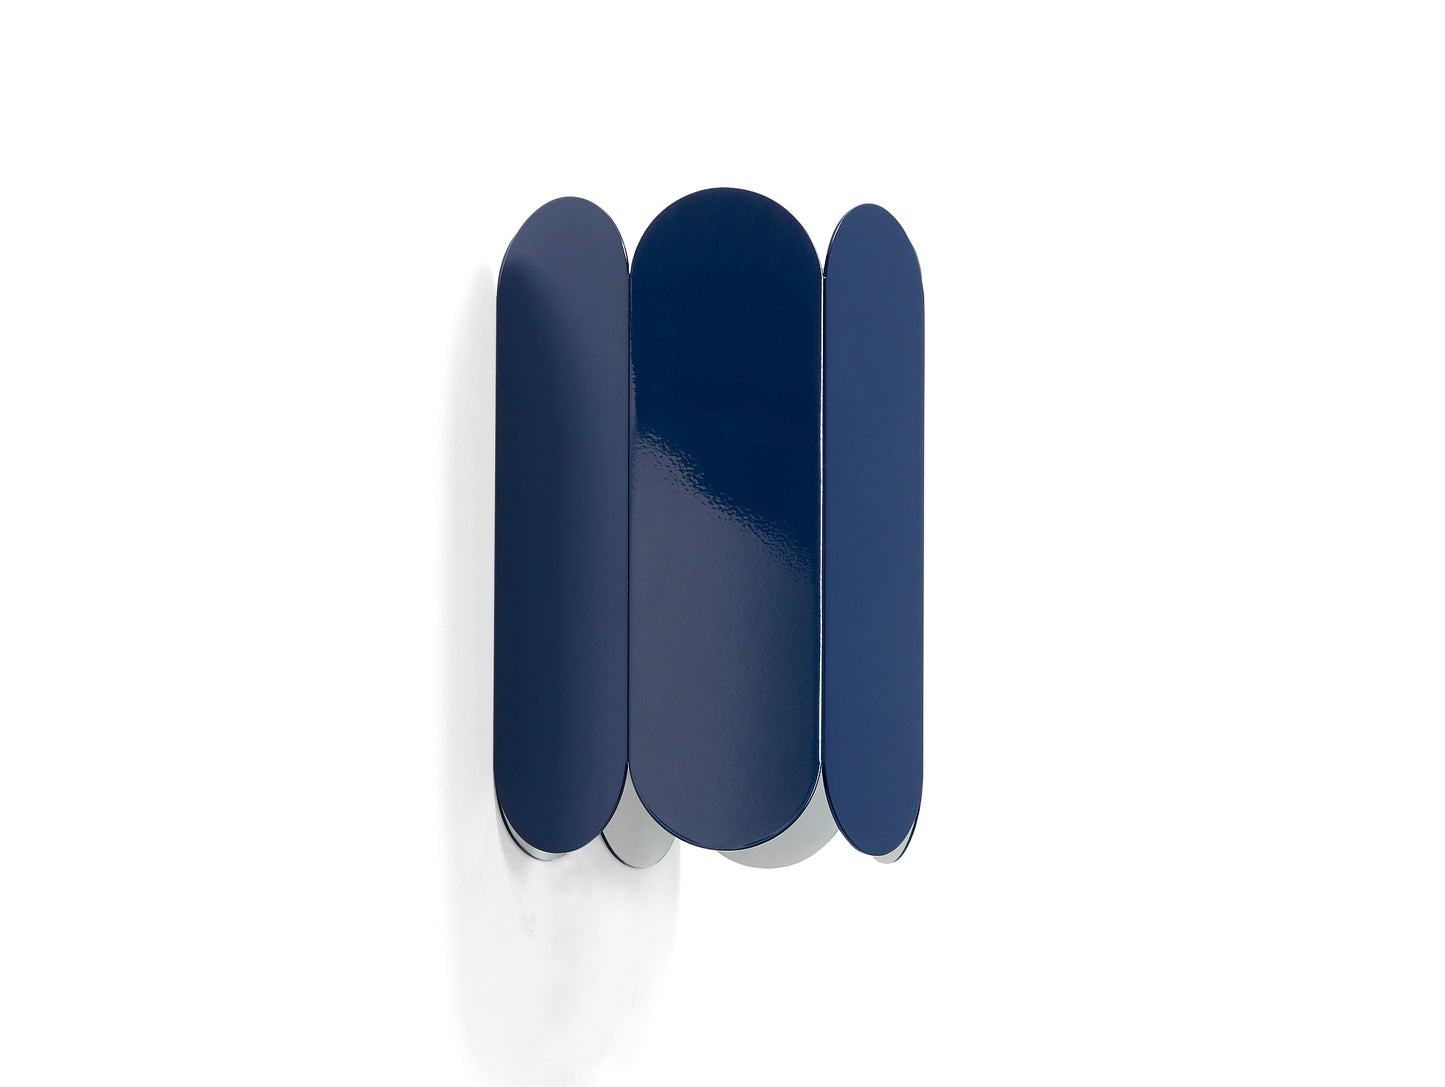 Cobalt Blue Arcs Wall Sconce Lamp by HAY